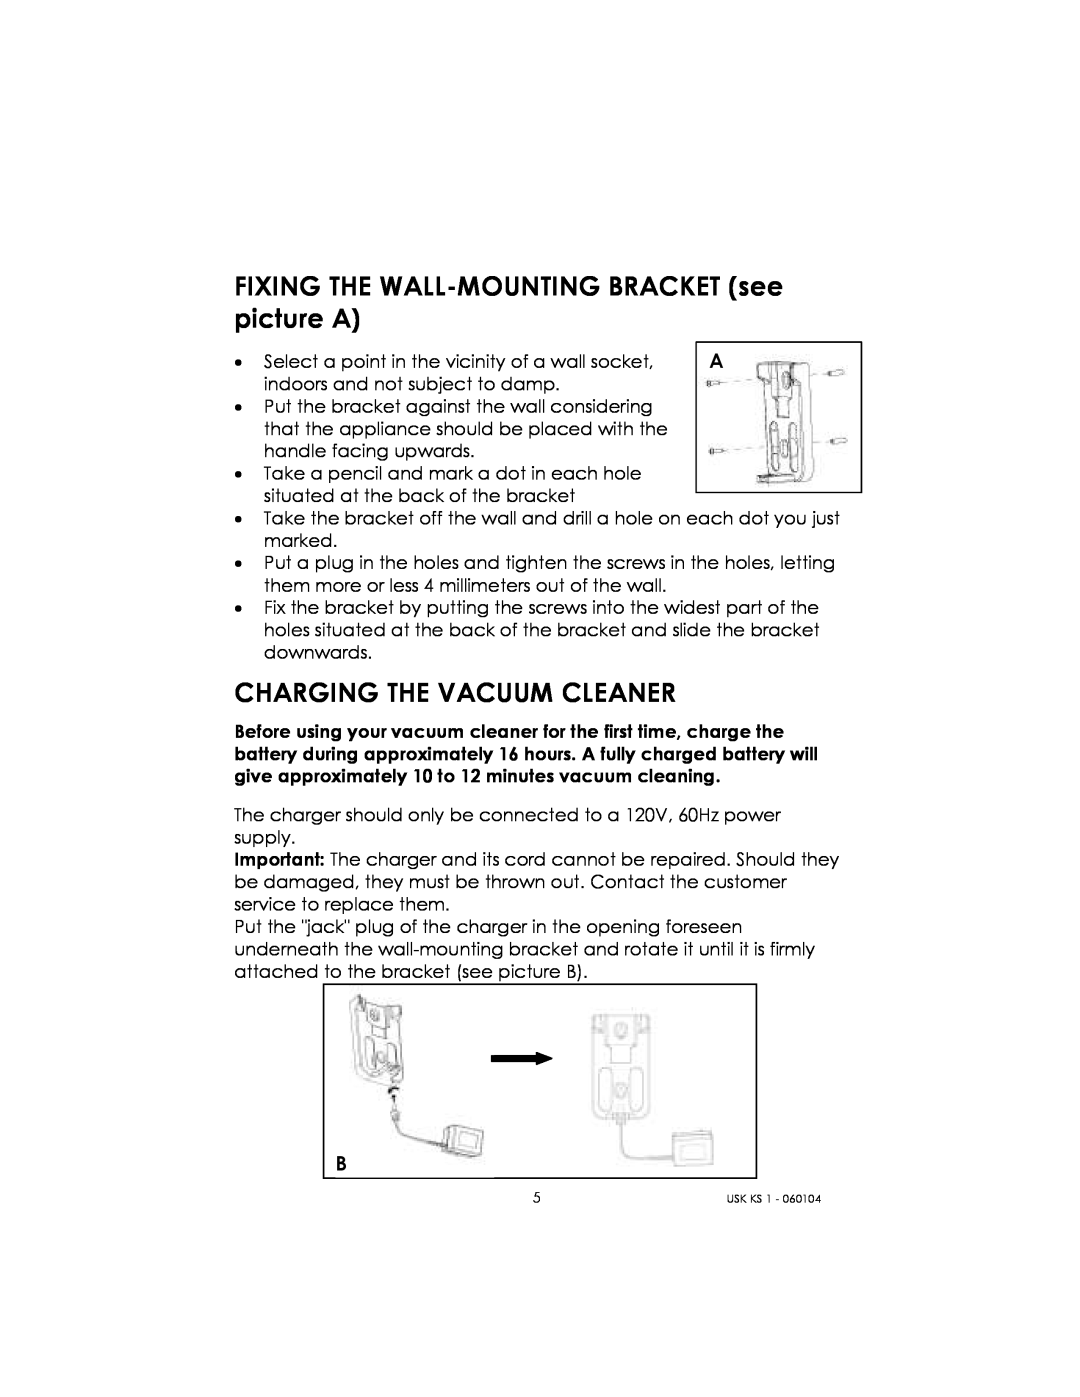 Kalorik USK KS 1 manual FIXING THE WALL-MOUNTINGBRACKET see picture A, Charging The Vacuum Cleaner 